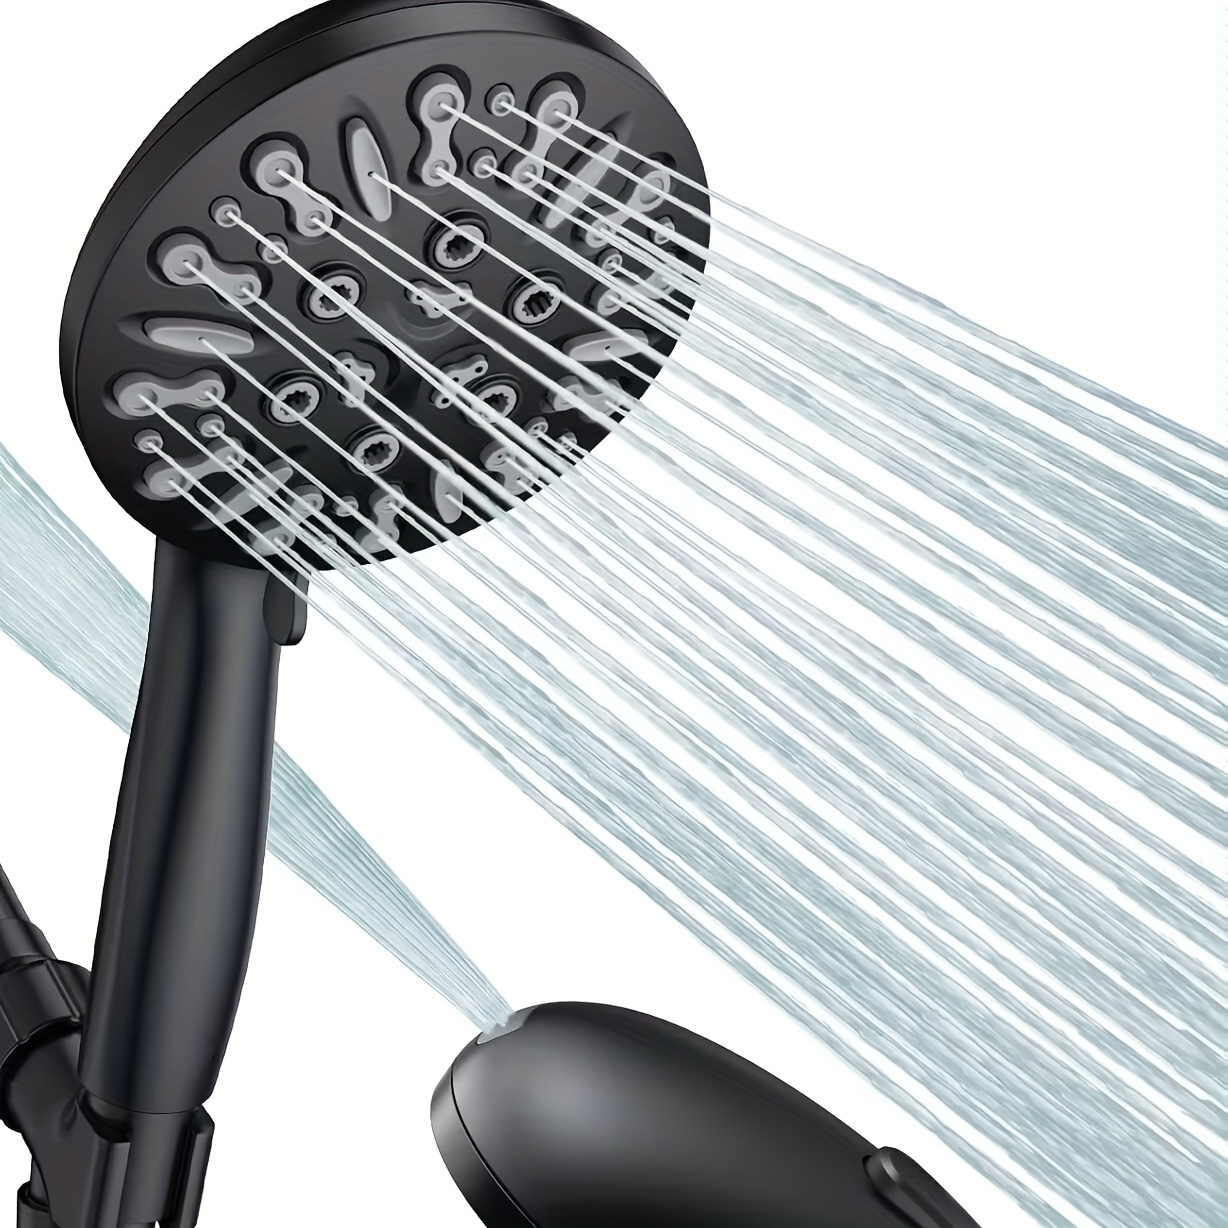 

High Pressure 8-setting Handheld Shower Head - Built-in Power Wash To Clean Tub, Tile & Pets, High Powerul Hand Held Rain Showerhead With Stainless Steel Hose And Adjustable Bracket